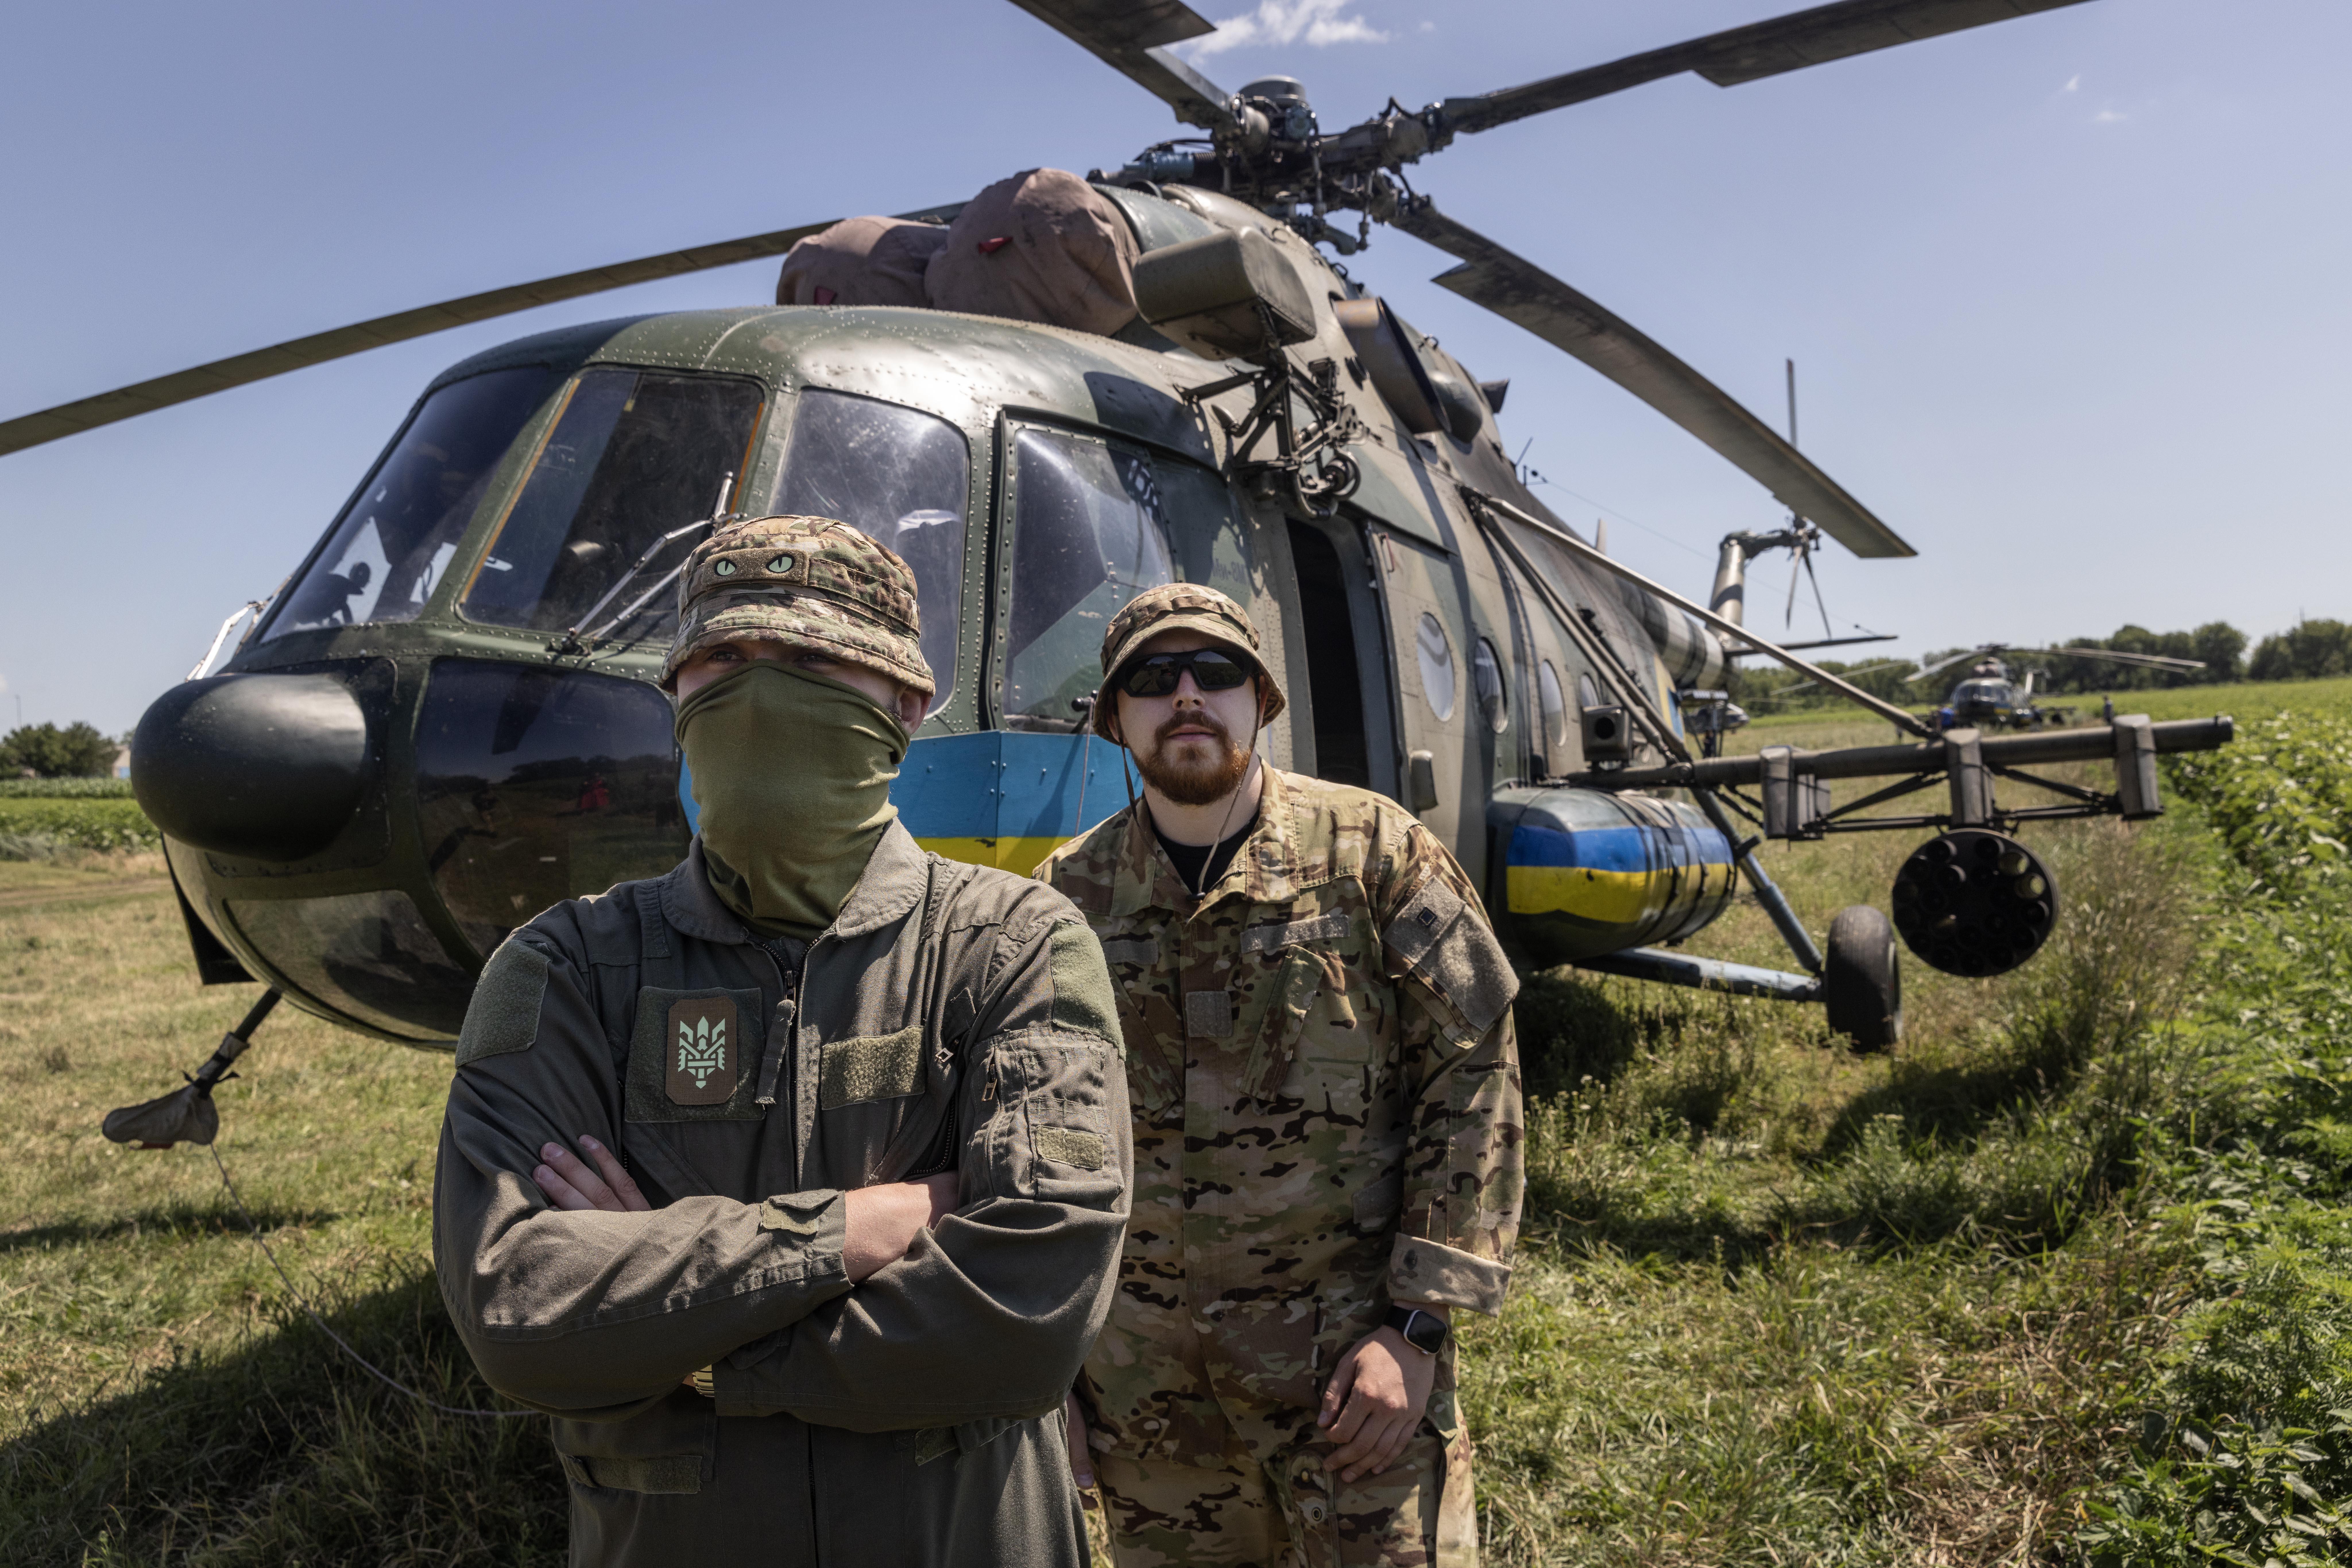 Outnumbered with outdated kit: a day with Ukraine’s heroic helicopter pilots